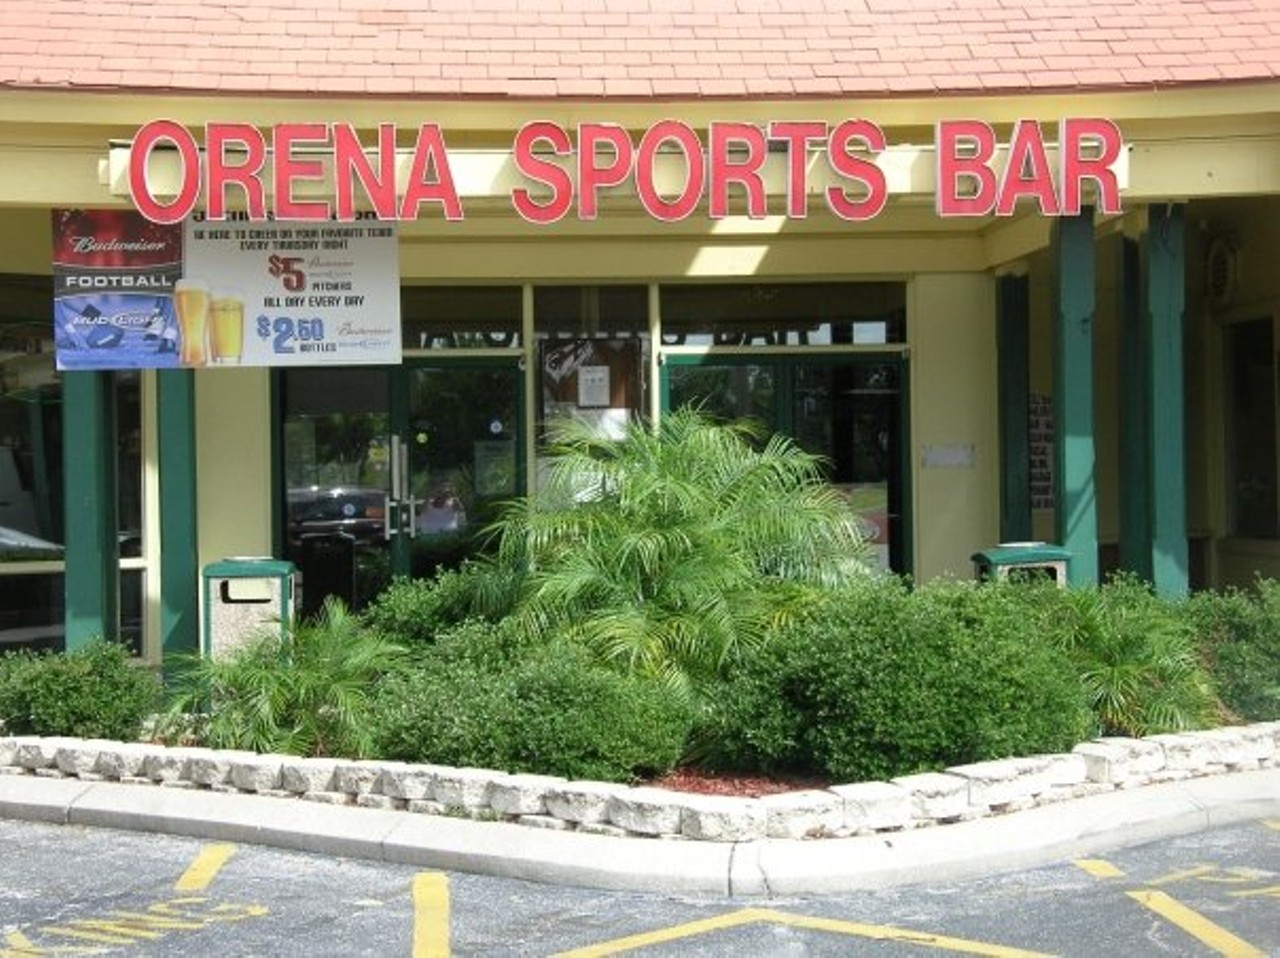 Orena Sports Bar 
6159 Westwood Blvd , (407) 370-0303
How often do you get the chance to play ping pong in a bar? This sports-focused dive also has decent bar grub.
